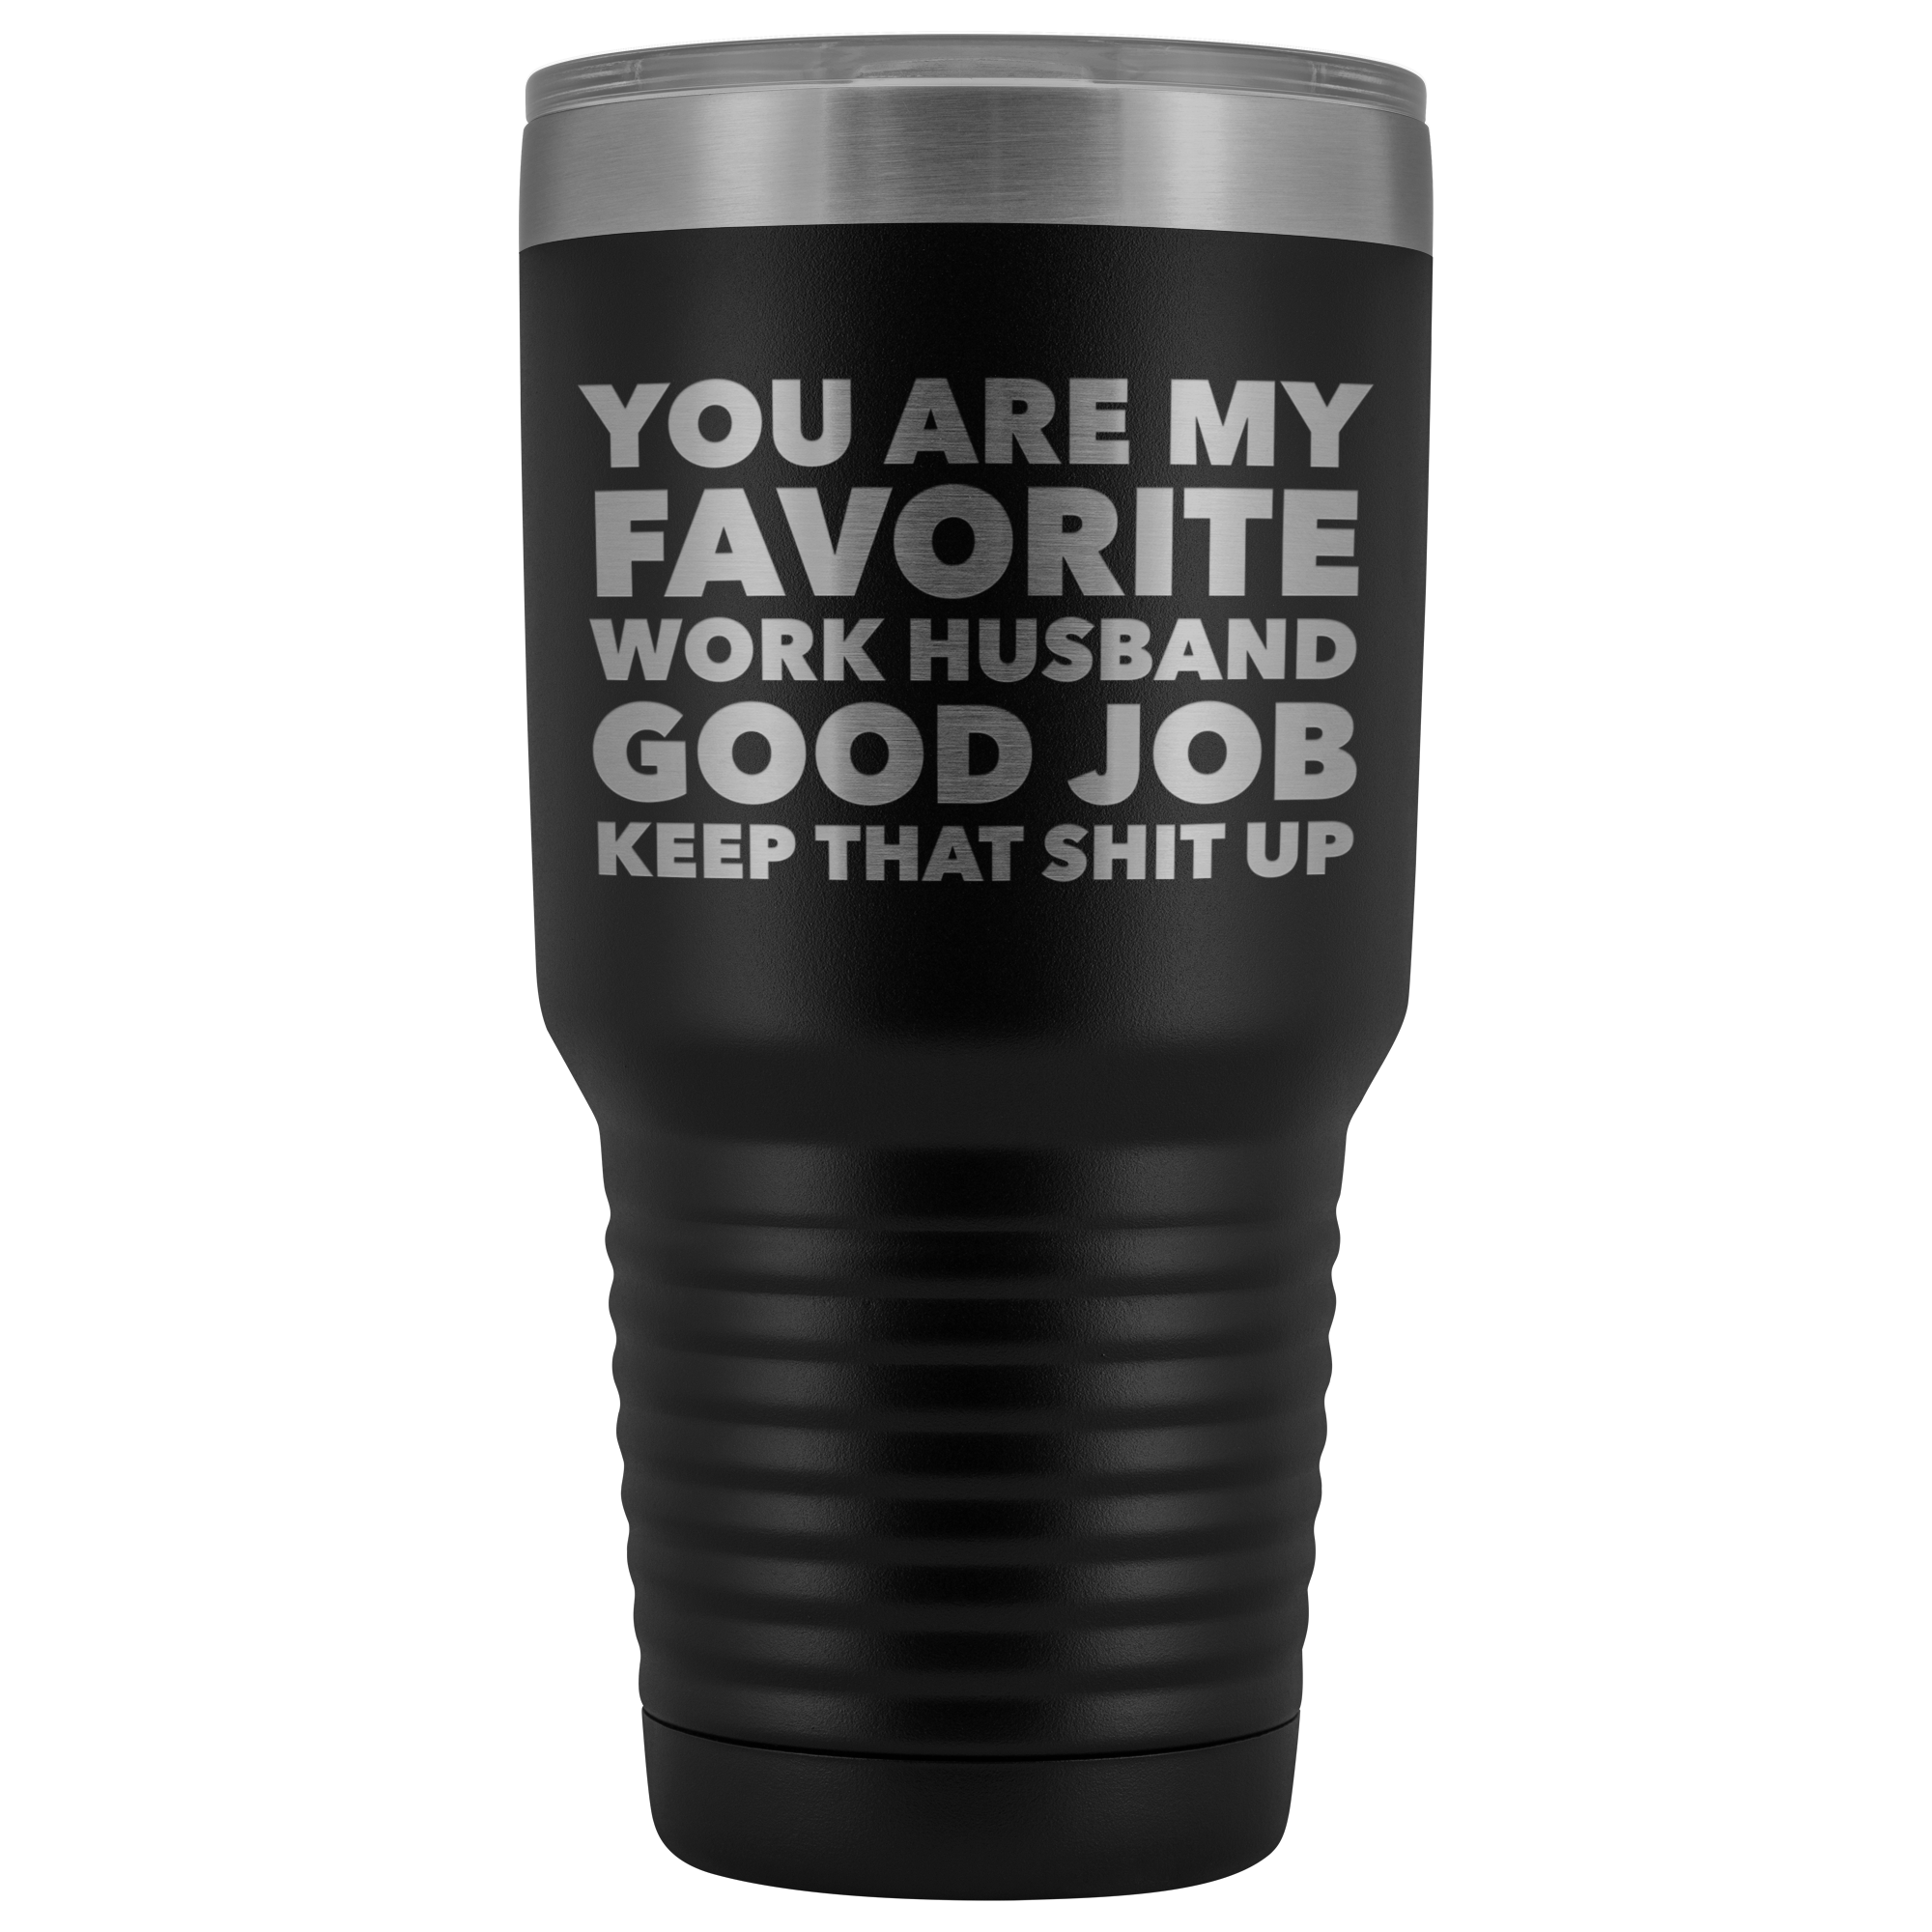 You are My Favorite Work Husband Tumbler Funny Coworker Gifts Metal Mug Insulated Hot Cold Travel Coffee Cup 30oz BPA Free